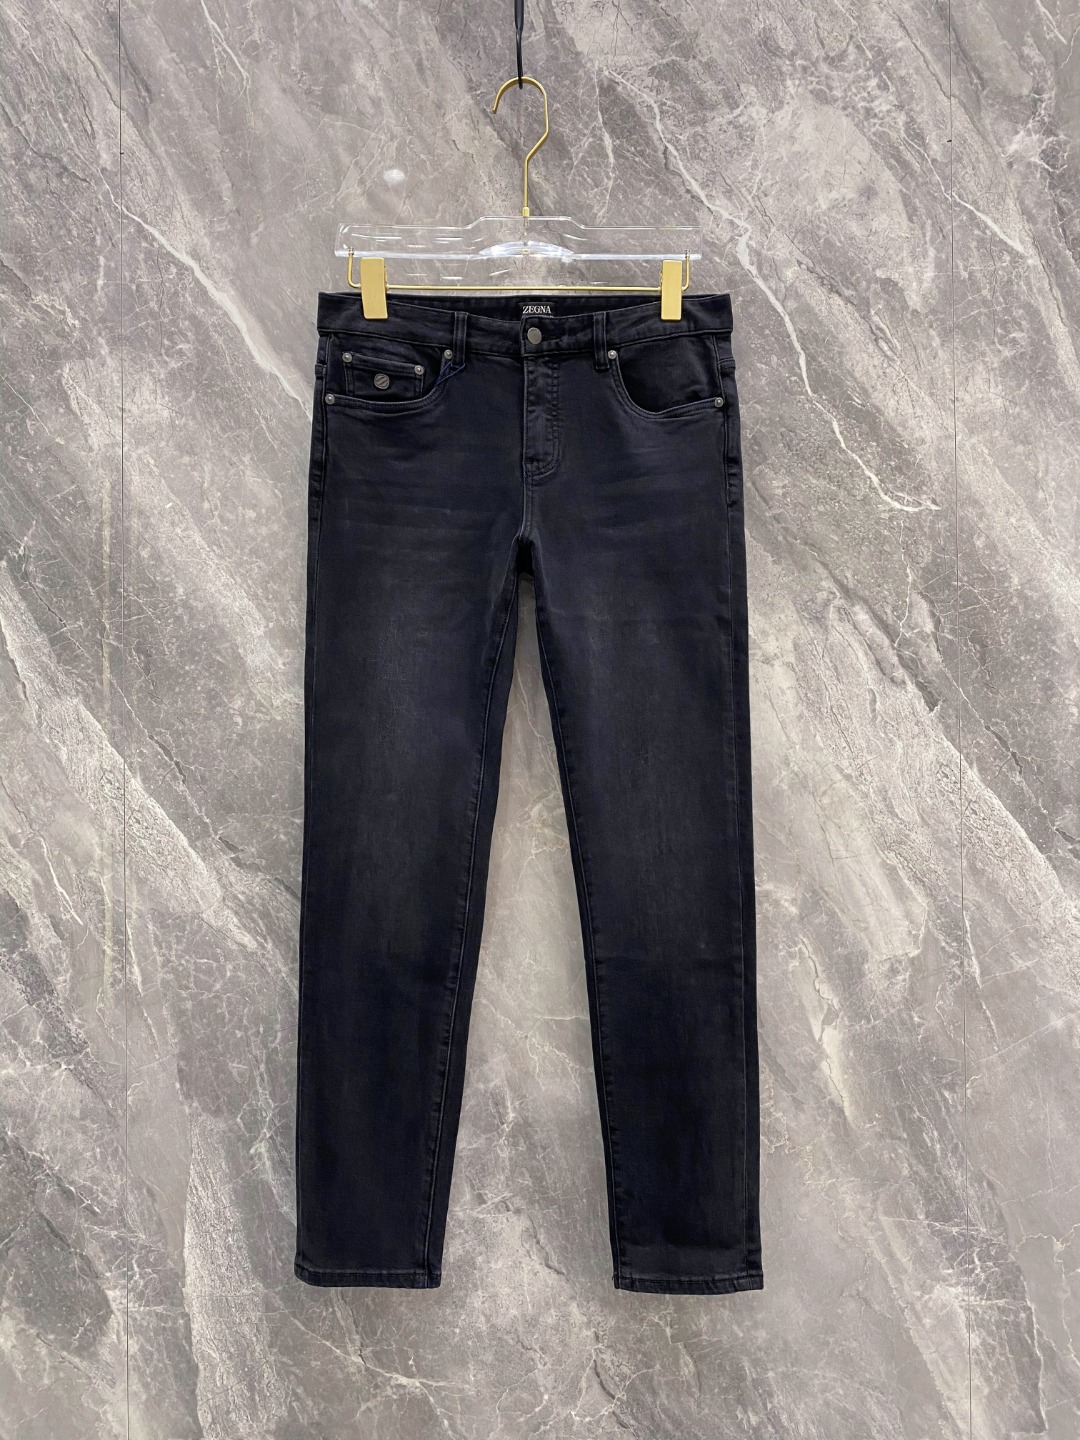 Zegna Clothing Jeans Men Cotton Denim Fall/Winter Collection